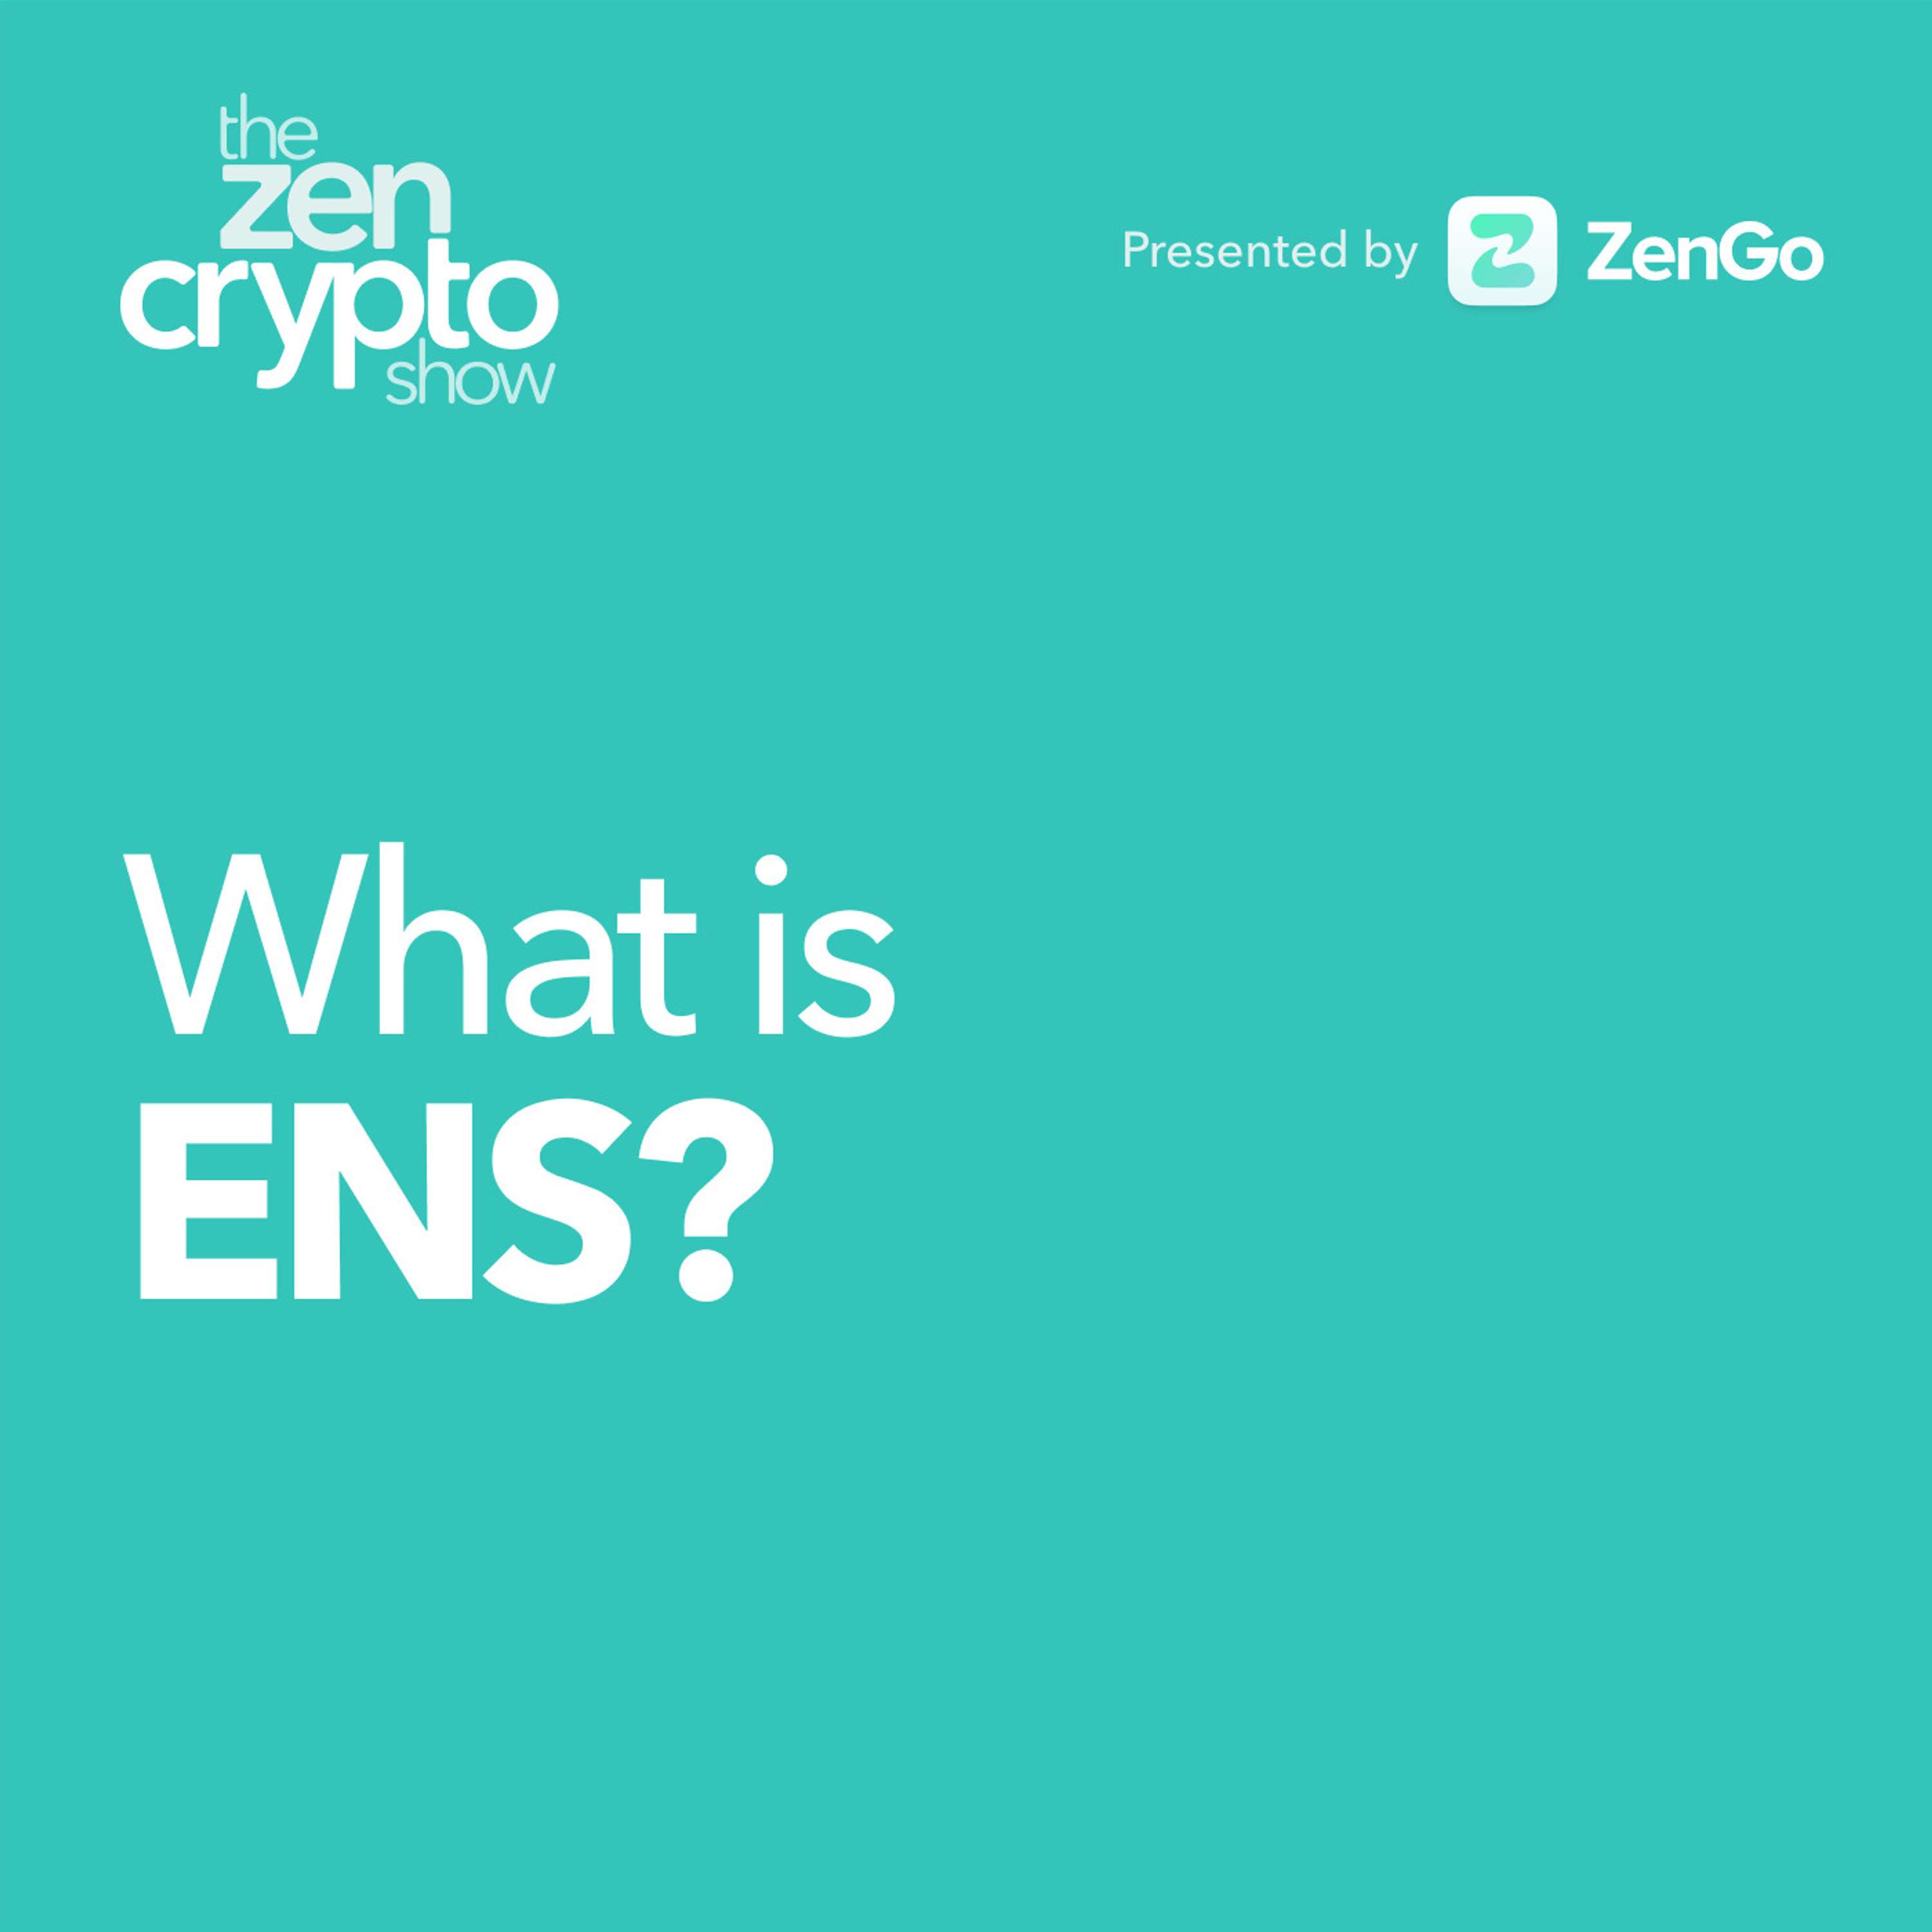 What is ENS?